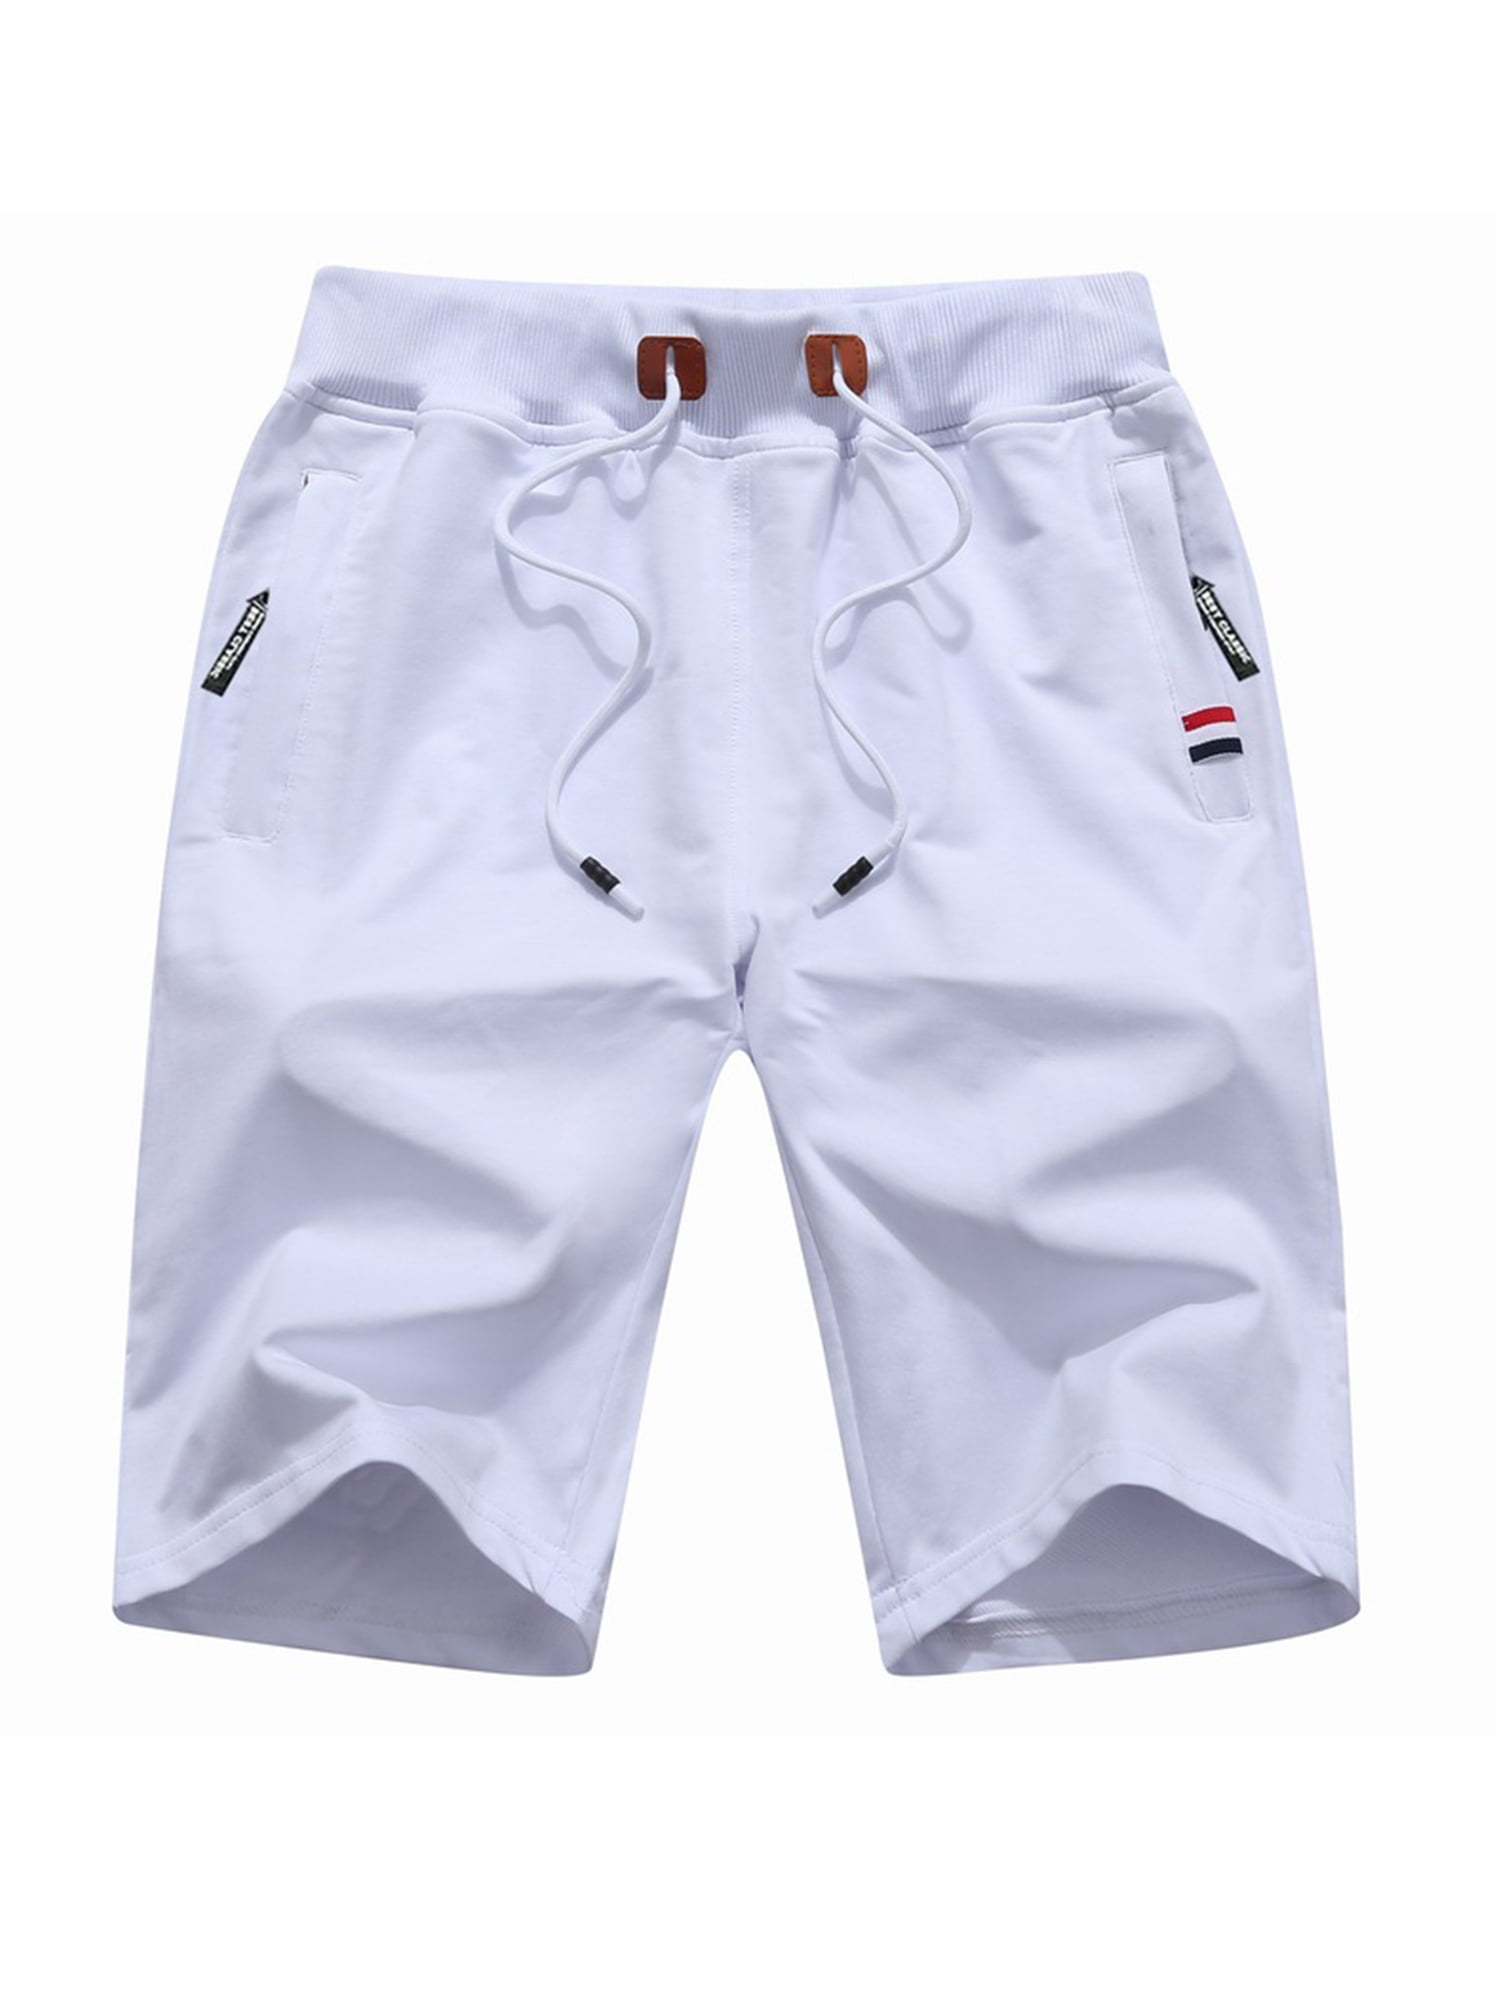 Men's Shorts Casual Classic Fit Drawstring Summer Beach Shorts with Elastic Waist and Pockets Shorts Men Mens Casual Shorts